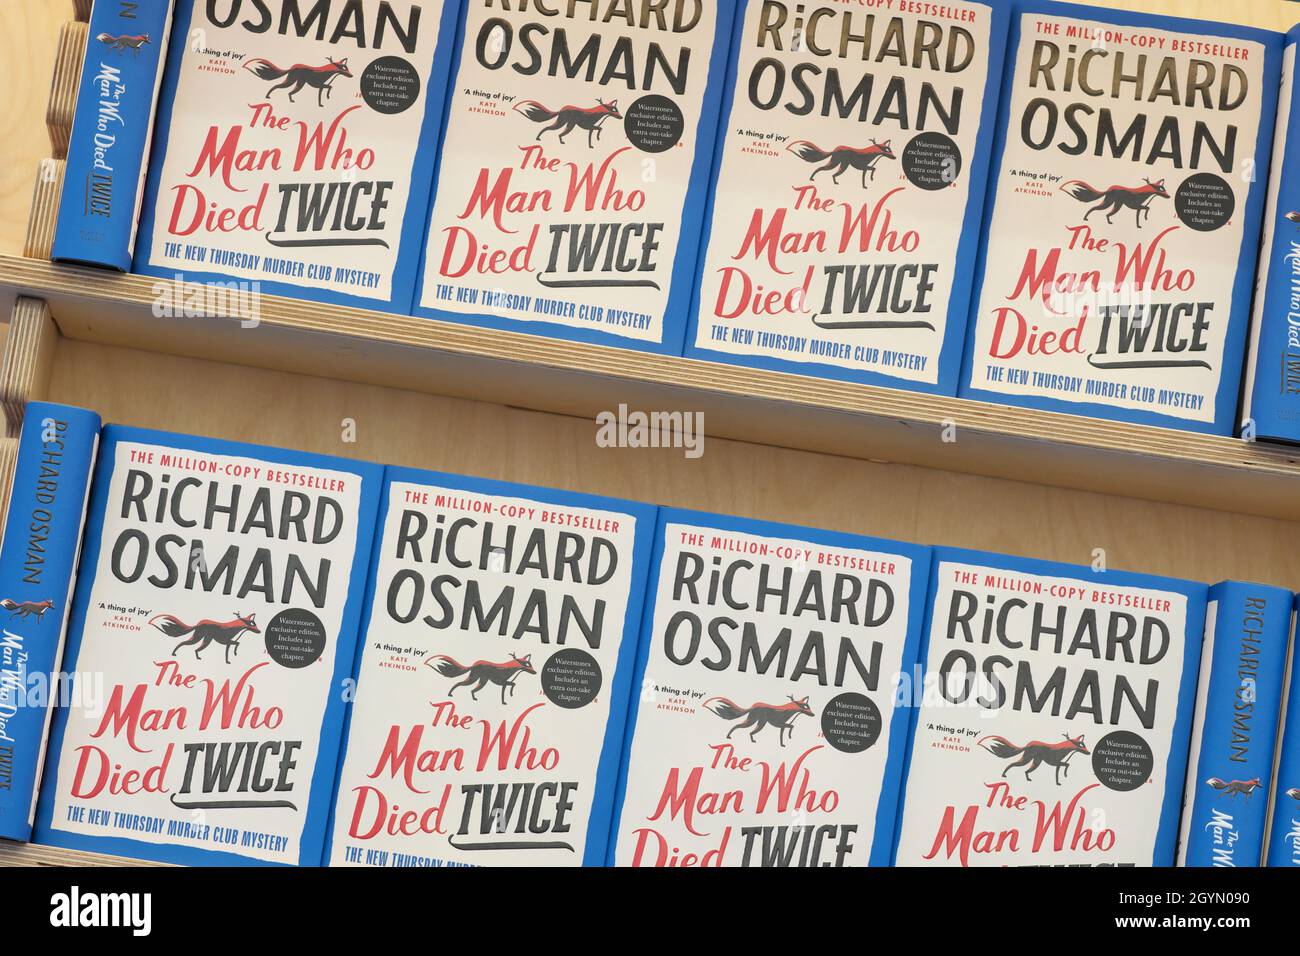 Cheltenham Literature Festival, Cheltenham, UK - Friday 8th October 2021 - Selection of new books on sale on the opening day of the Cheltenham Literature Festival including Richard Osman - the Festival runs for 10 days - book sales have soared during the pandemic. Photo Steven May / Alamy Live News Stock Photo